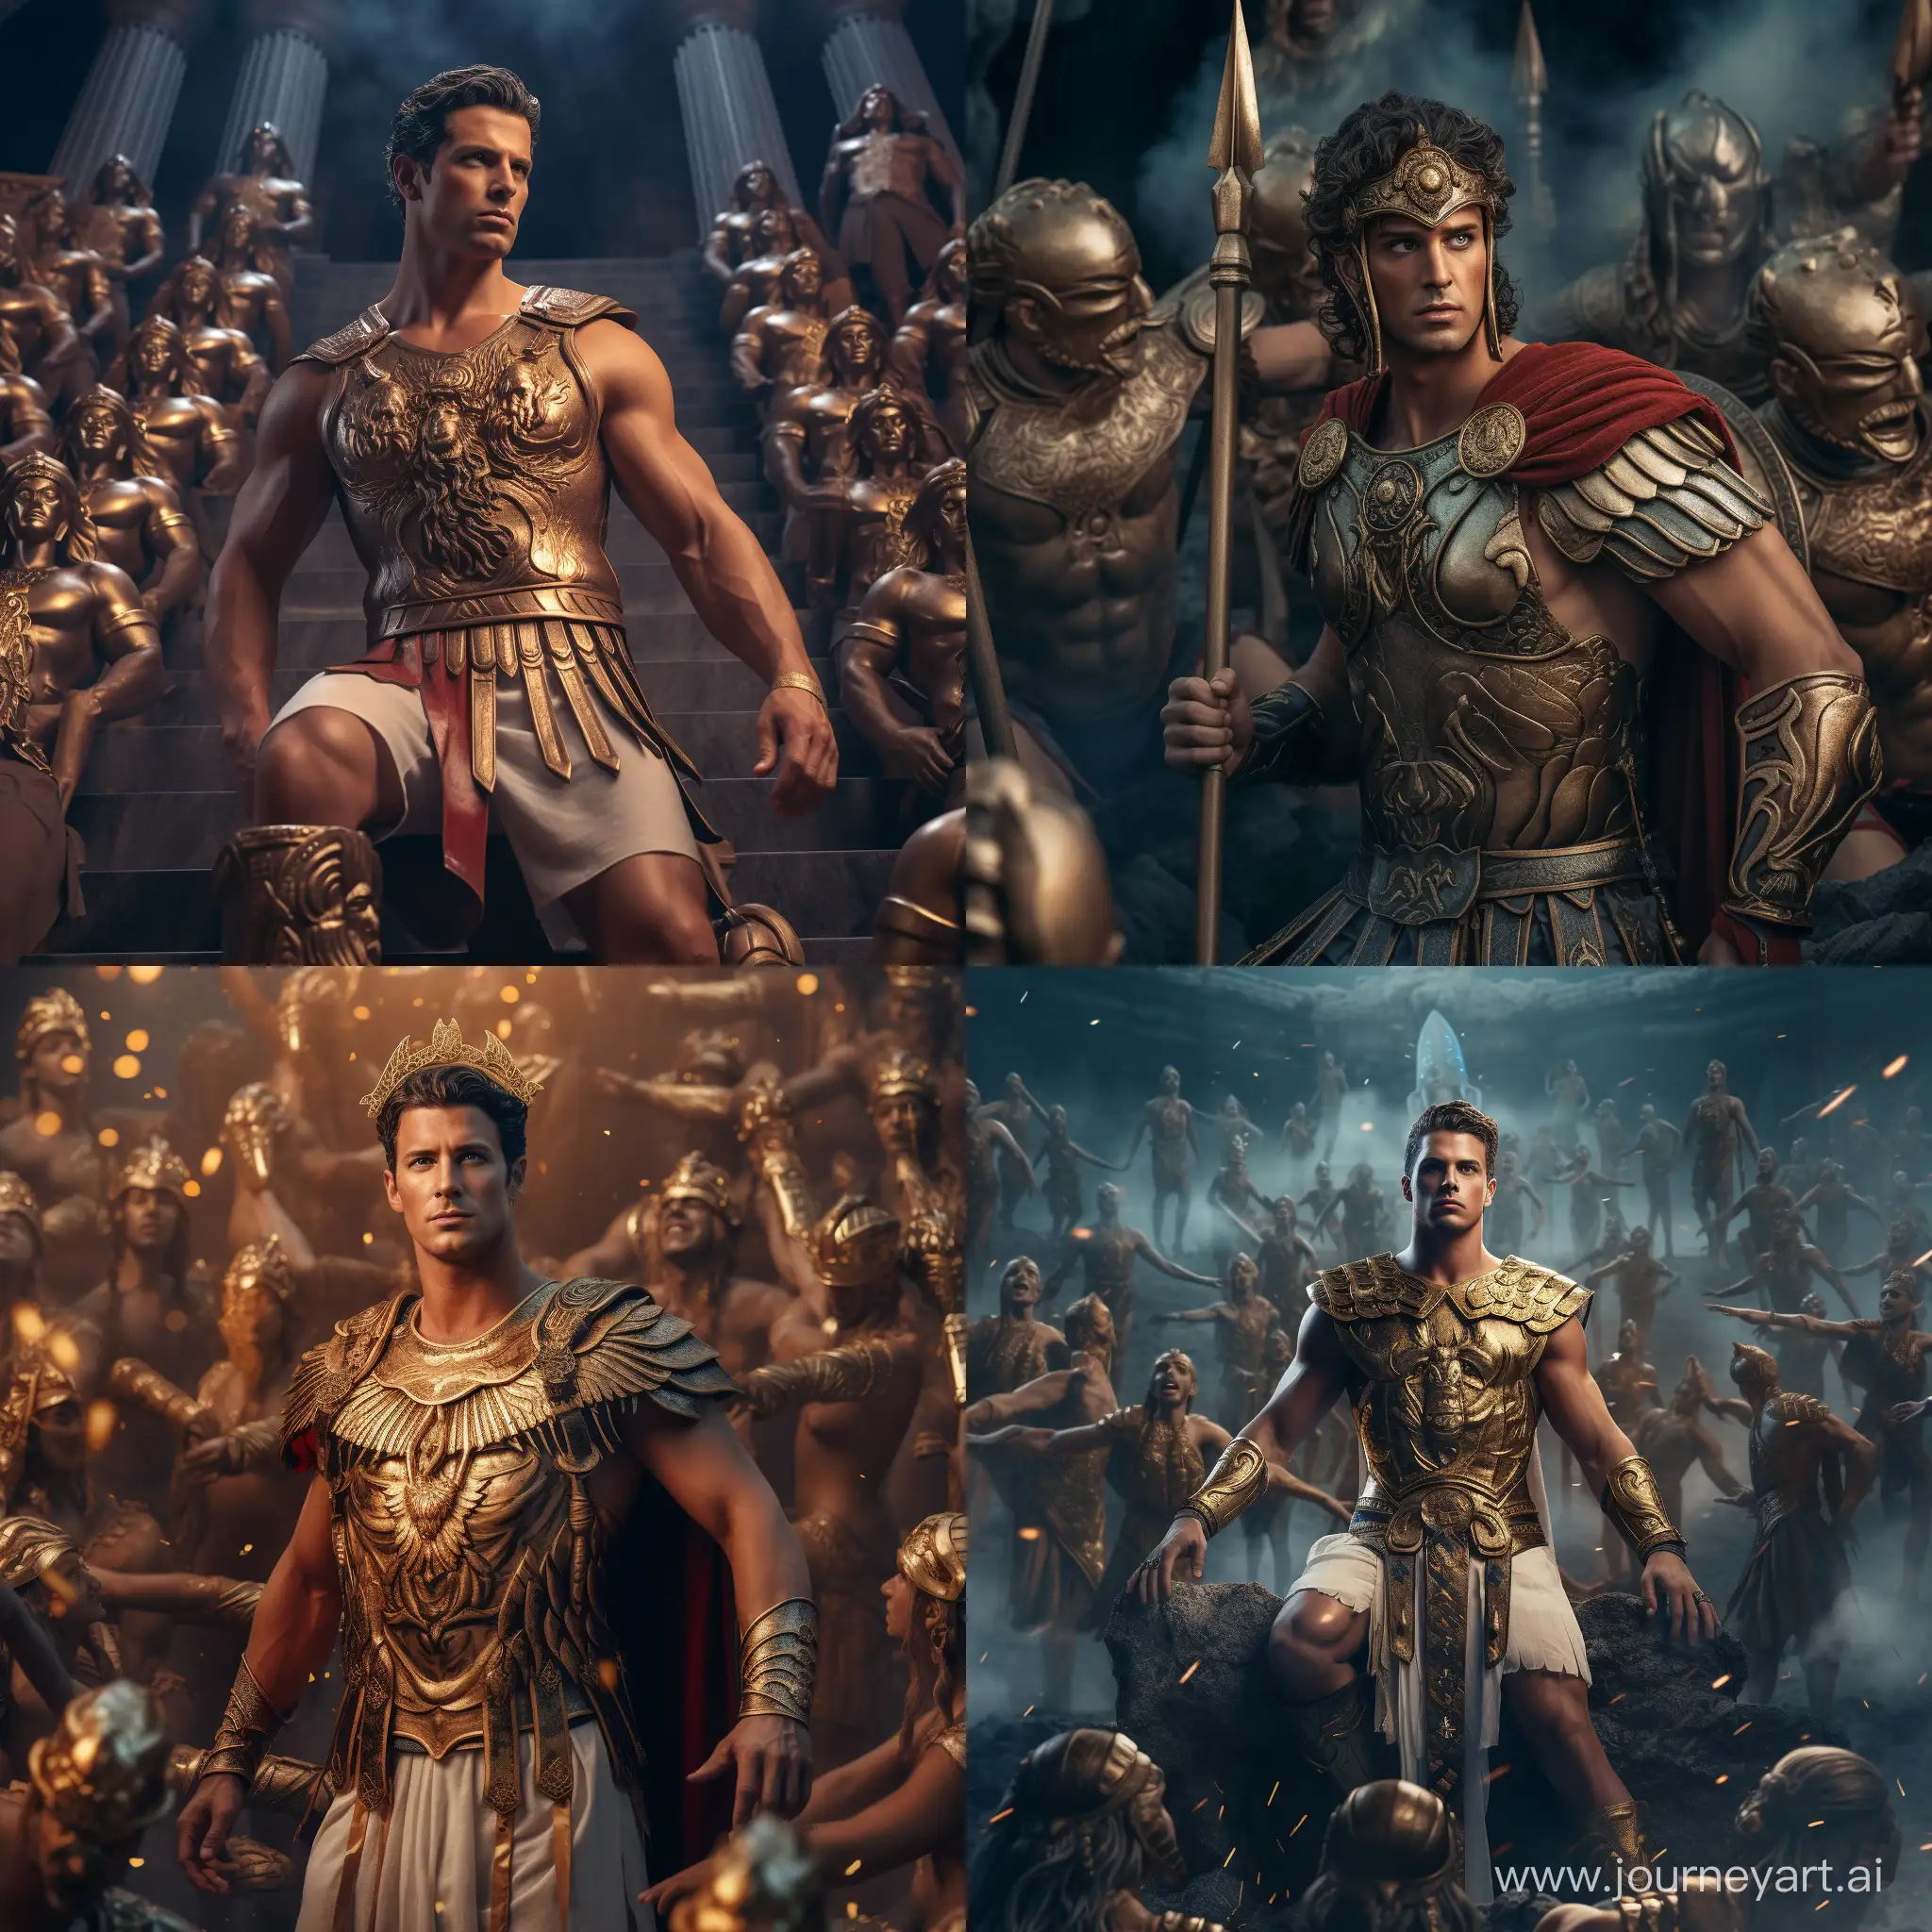 Cristiano Ronaldo as Greek Olympus with the gods, Cinematic, Color Grading, portrait Photography, Depth of Field, hyper-detailed, beautifully color-coded, insane details, intricate details, beautifully color graded, Unreal Engine, Cinematic, Color Grading, Editorial Photography, Photography, Photoshoot, Shot on 70mm lens, Depth of Field, DOF, Shutter Speed 1/1000, F/2, White Balance, 32k, Super-Resolution, Megapixel, Pro Photo GB, VR, Lonely, Good, Massive, Half rear Lighting, Backlight, Natural Lighting, Incandescent, Optical Fiber, Moody Lighting, Cinematic Lighting, Studio Lighting, Soft Lighting, Volumetric, Contre-Jour, Beautiful Jewels, Accent Lighting, Global Illumination, Screen Space Global Illumination, Ray Tracing Global Illumination, Optics, Scattering, Glowing, Shadows, Rough, Shimmering, Ray Tracing Reflections, Lumen Reflections, Screen Space Reflections, Diffraction Grading, Chromatic Aberration, GB Displacement, Scan Lines, R a y Traced, Ray Tracing Ambient Occlusion, Anti- Aliasing, FKAA, TXAA, RTX, SSAO, Shaders, OpenGL-Shaders, GLSL-Shaders, Post Processing, Post-Production, Cell Shading, Tone Mapping, CGI, VFX, SFX, insanely detailed and intricate, hyper maximalist, elegant, hyper realistic, super detailed, dynamic pose, photography, Hyper realistic, volumetric, photorealistic, ultra photoreal, ultra-detailed, super detailed, full color, ambient occlusion, volumetric lighting, high contrast , HDR super detailed